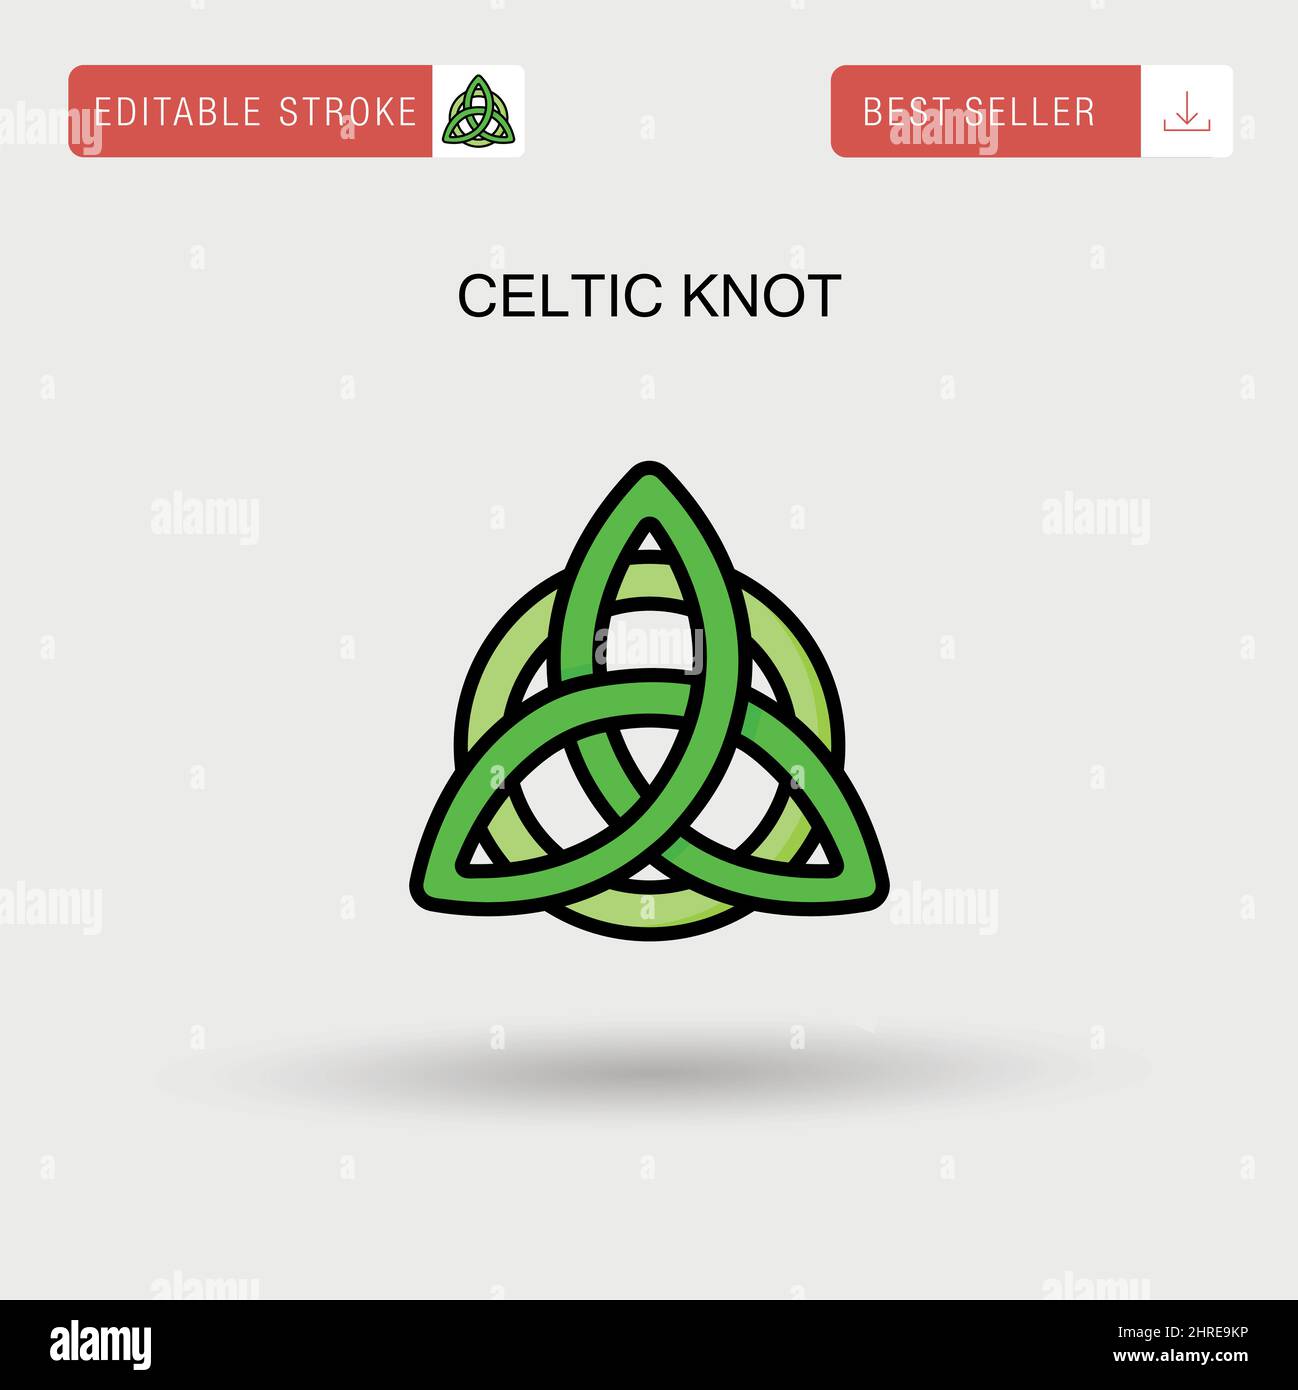 Celtic knot Simple vector icon. Stock Vector